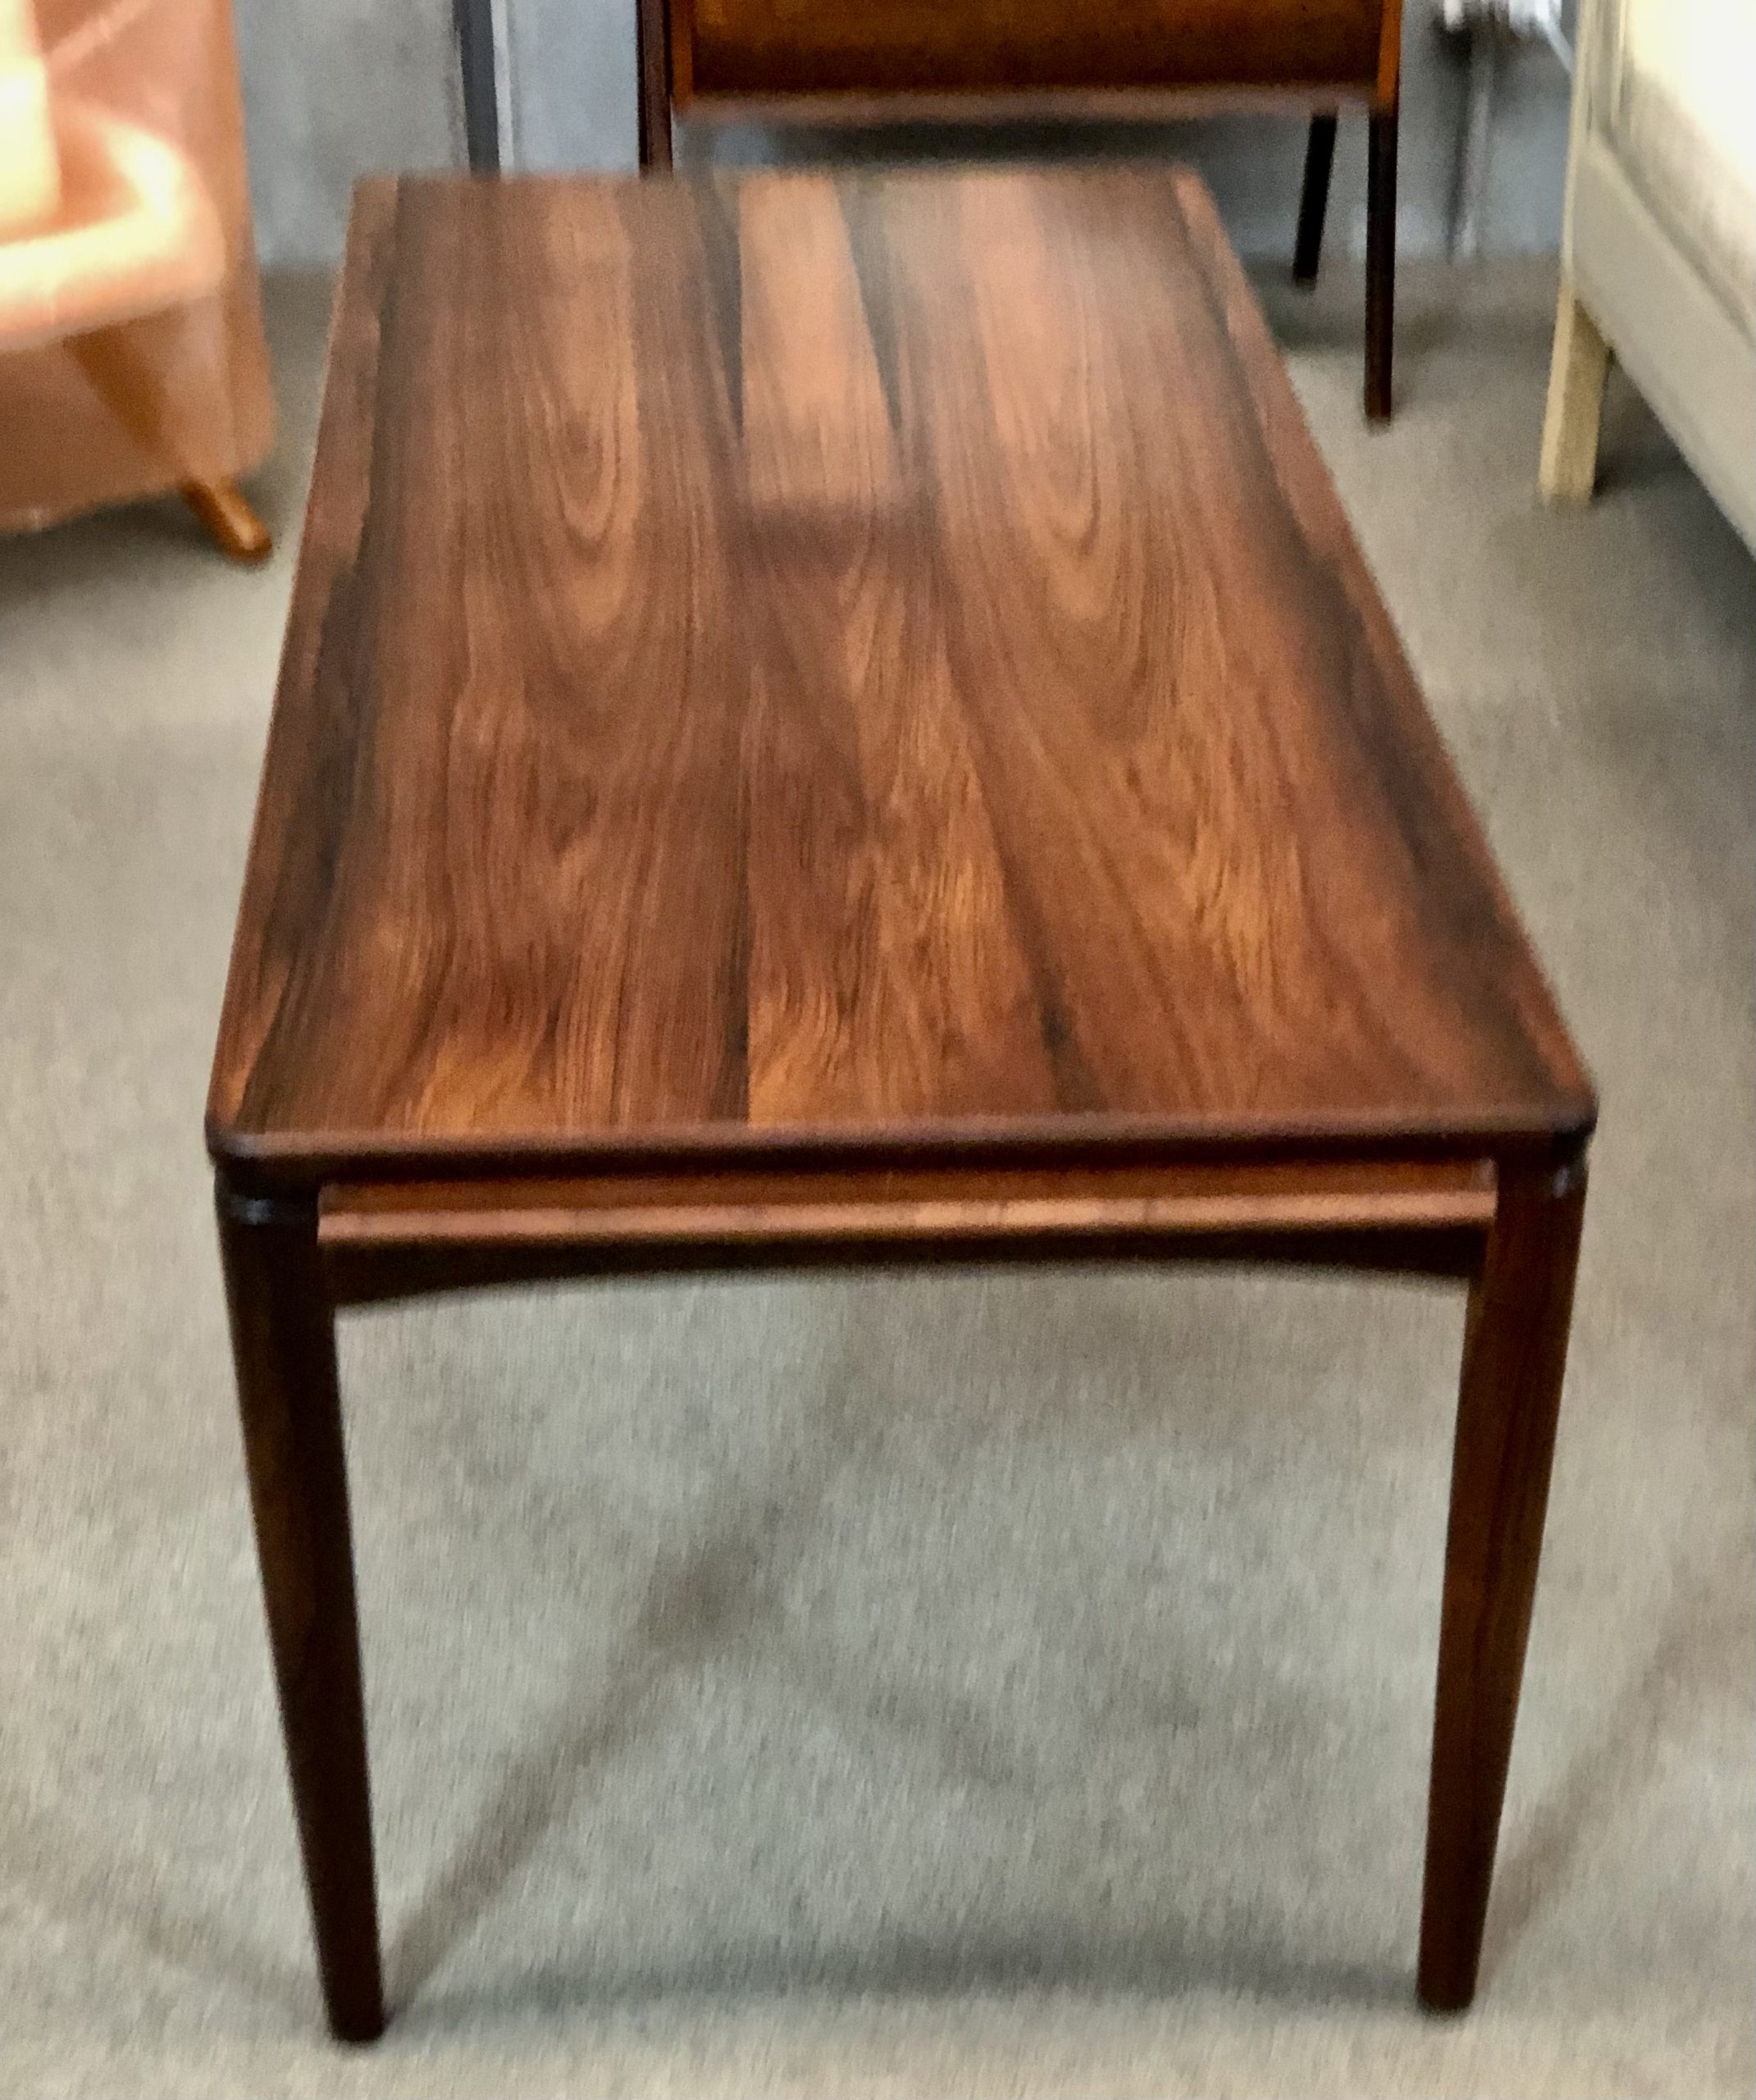 Ole Wanscher Rosewood Coffee Table